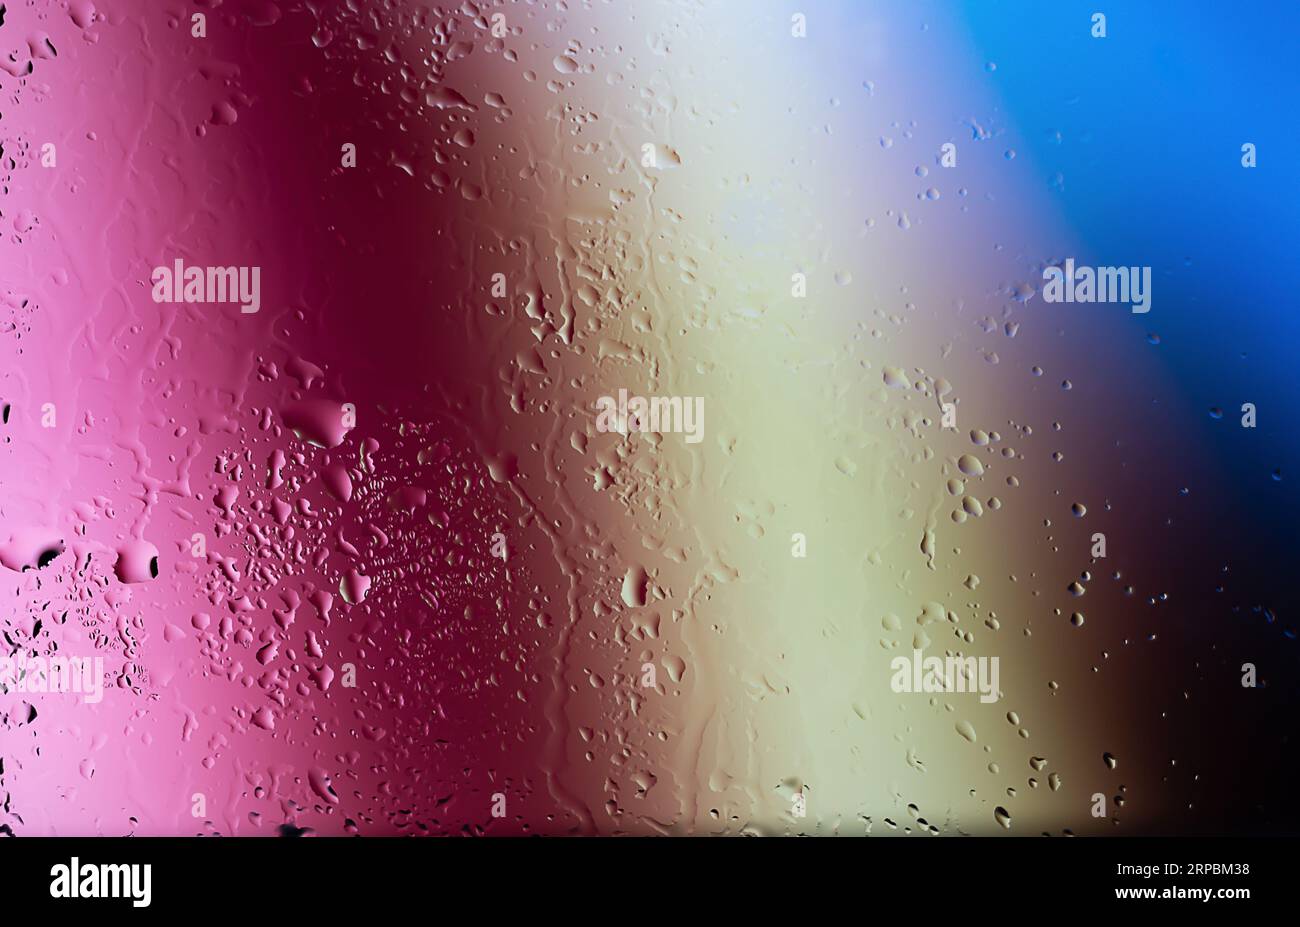 Water drops on a glass surface close up Stock Photo